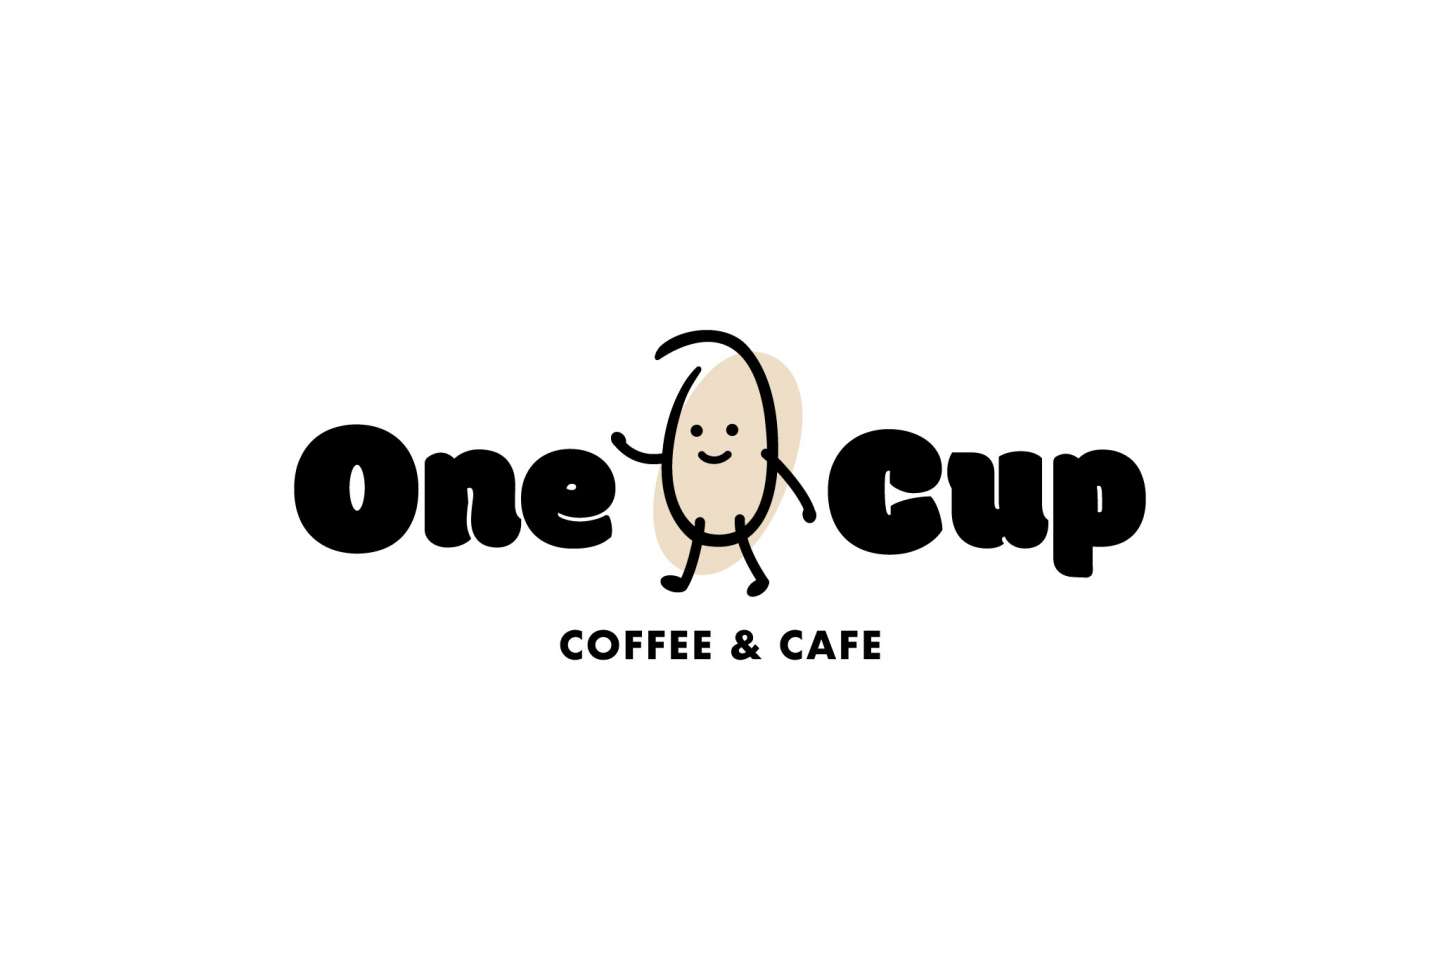 One Cup